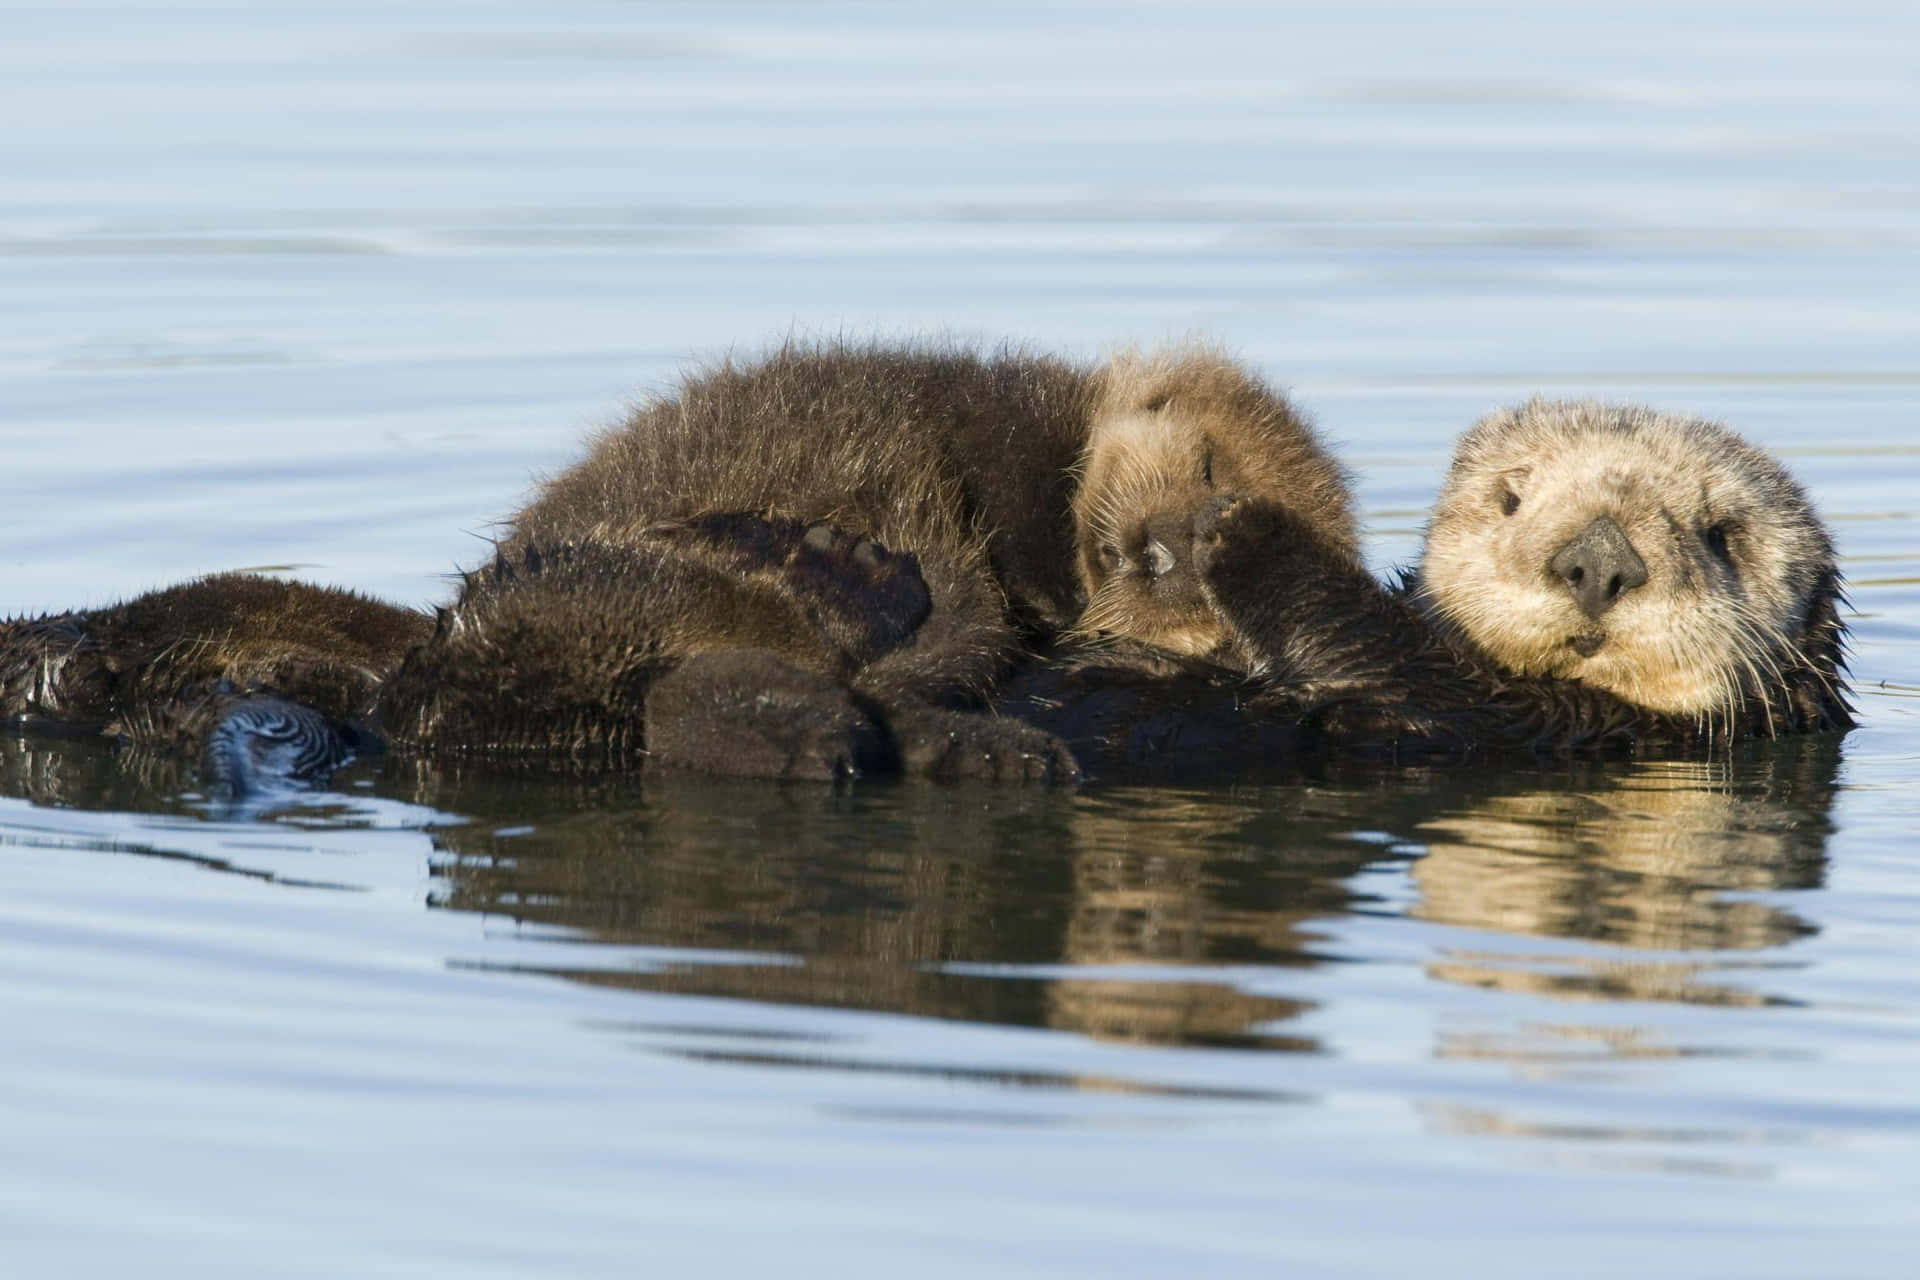 A playful otter takes a dip in the calm waters